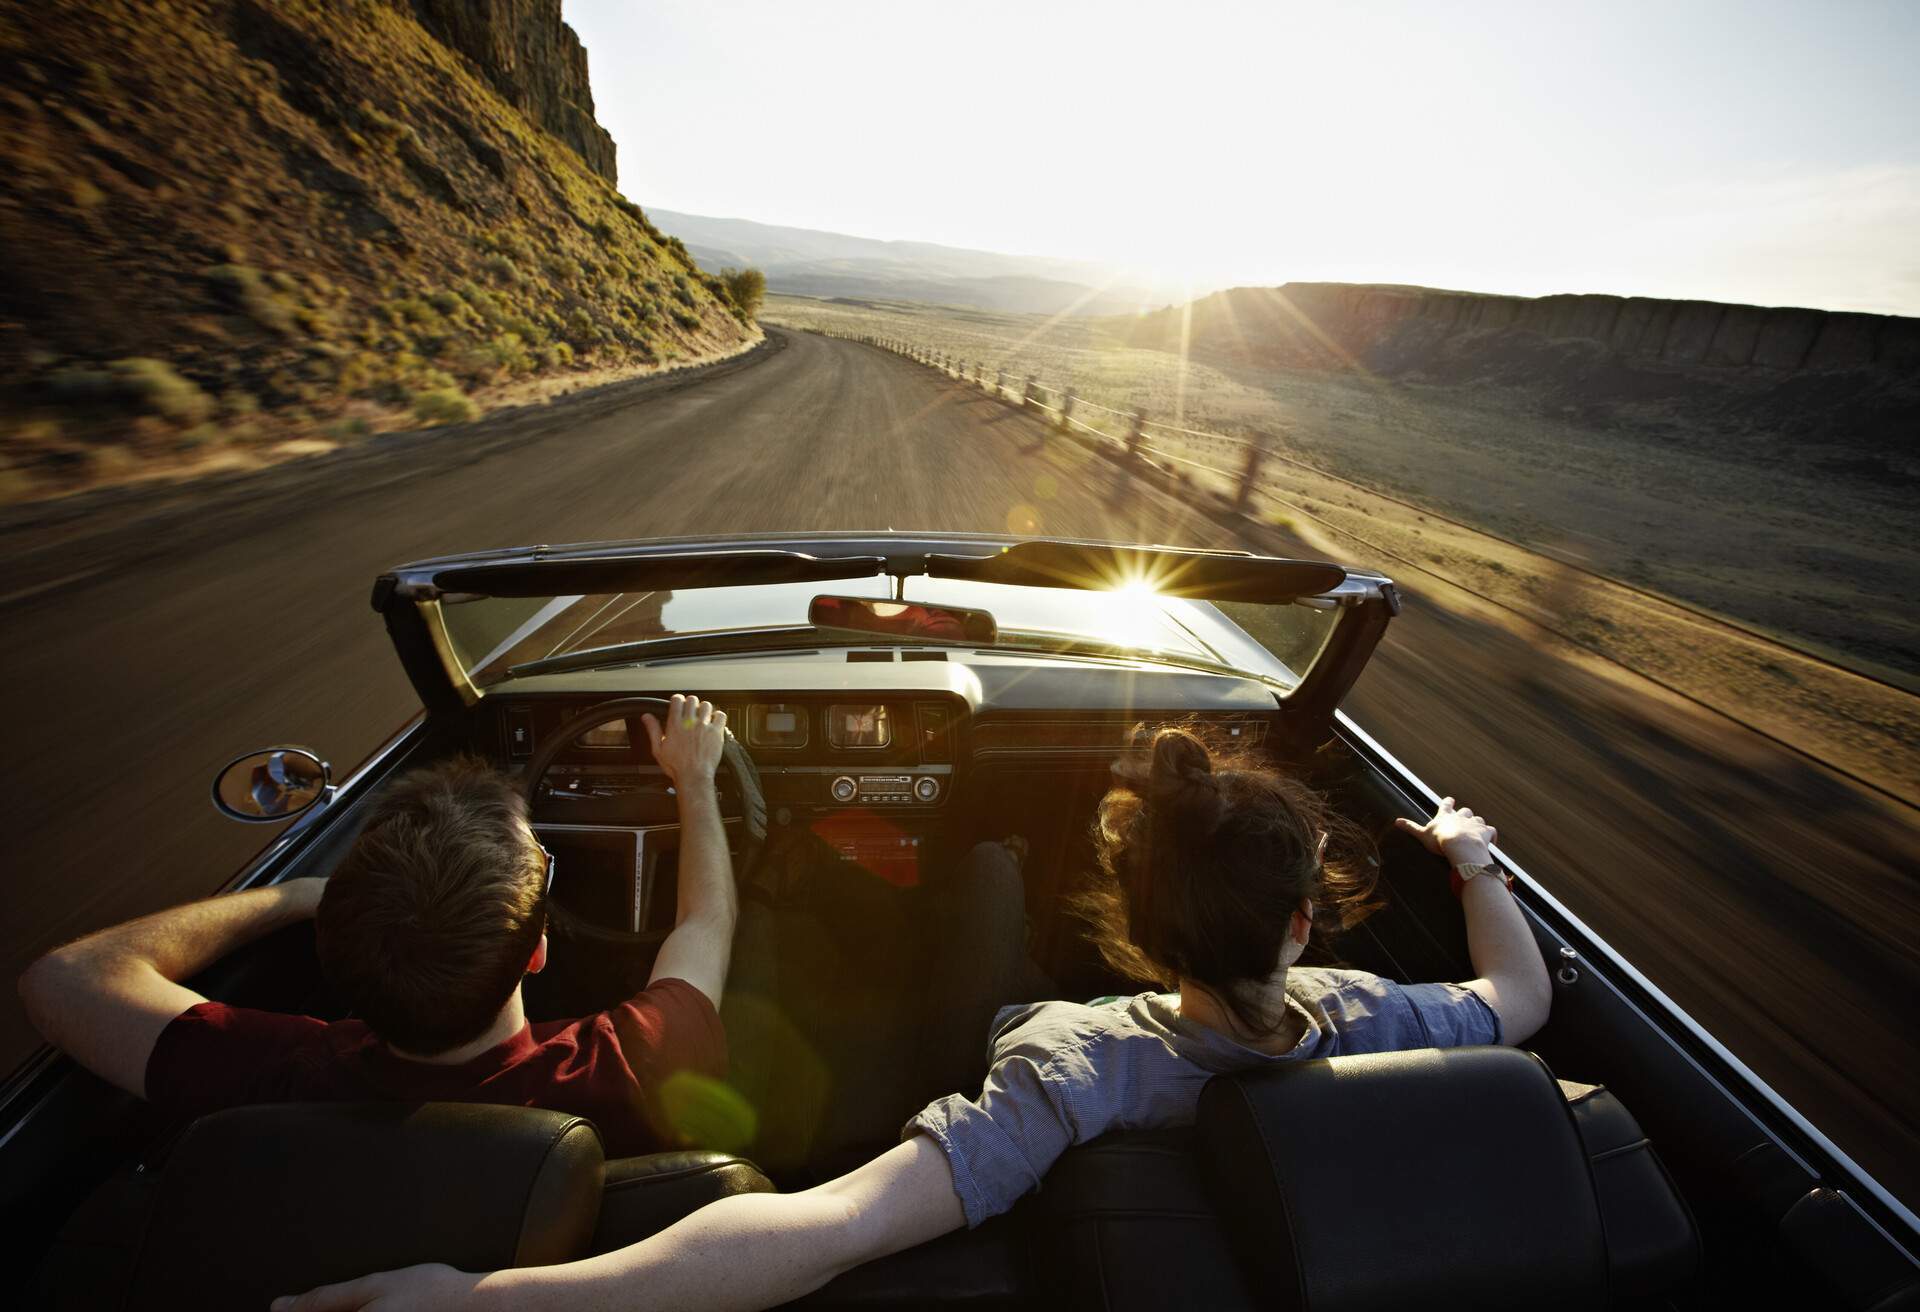 theme_people_car_roadtrip_convertible_gettyimages-104566861_universal_within-usage-period_71758